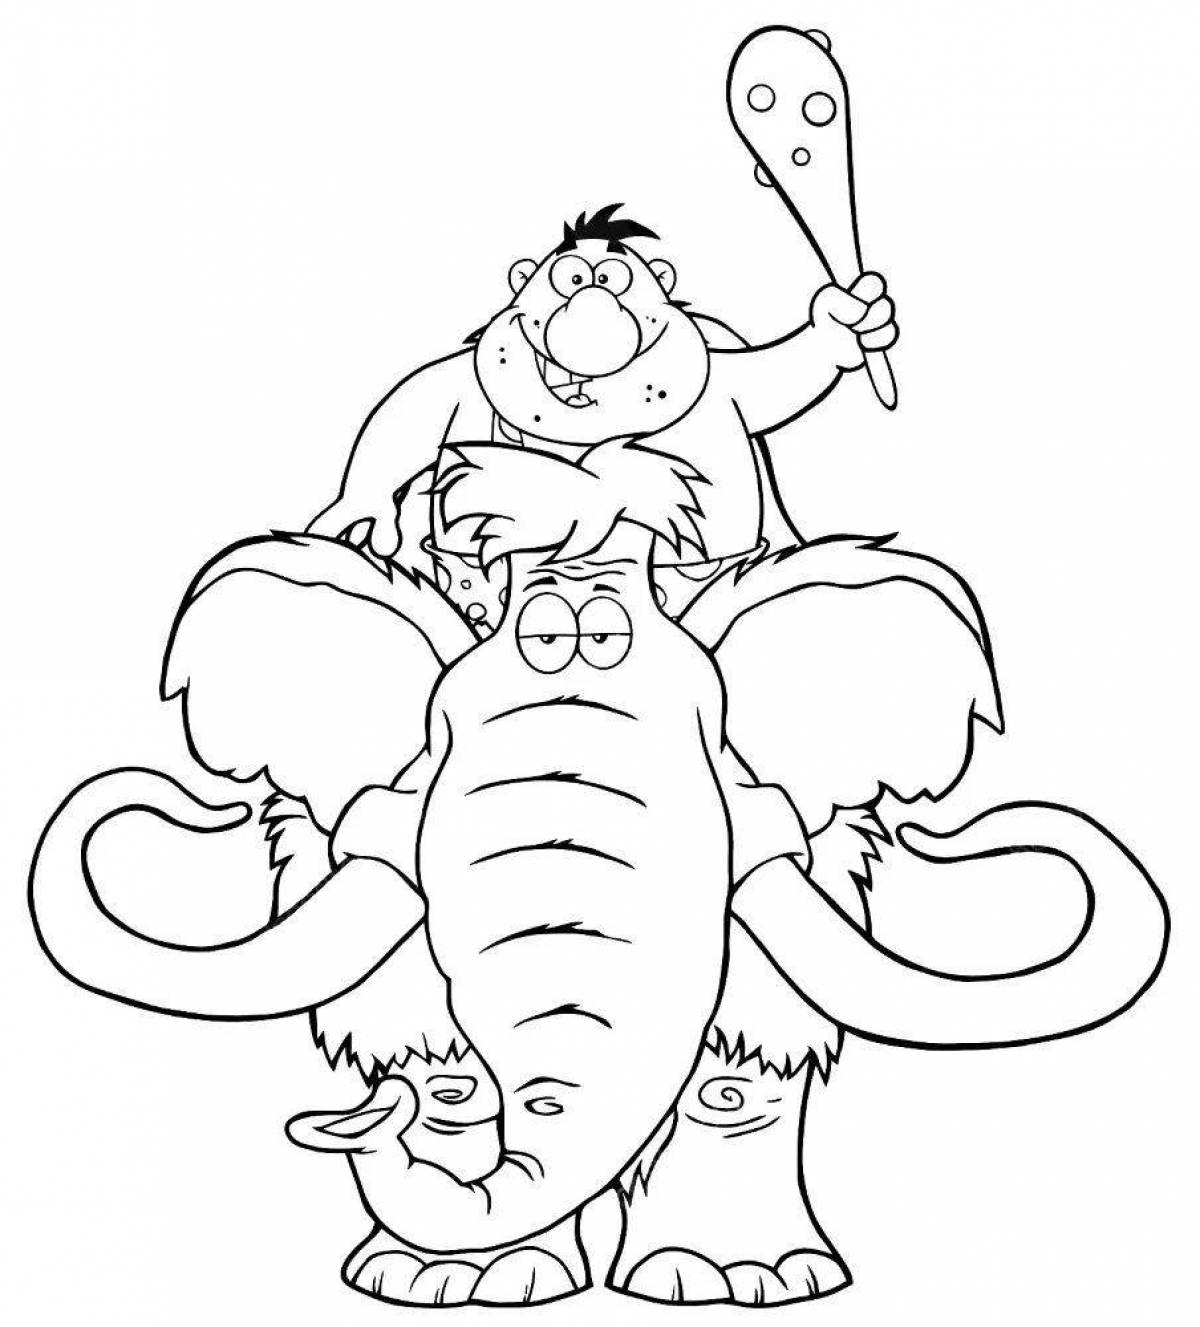 Lovely cave club coloring page